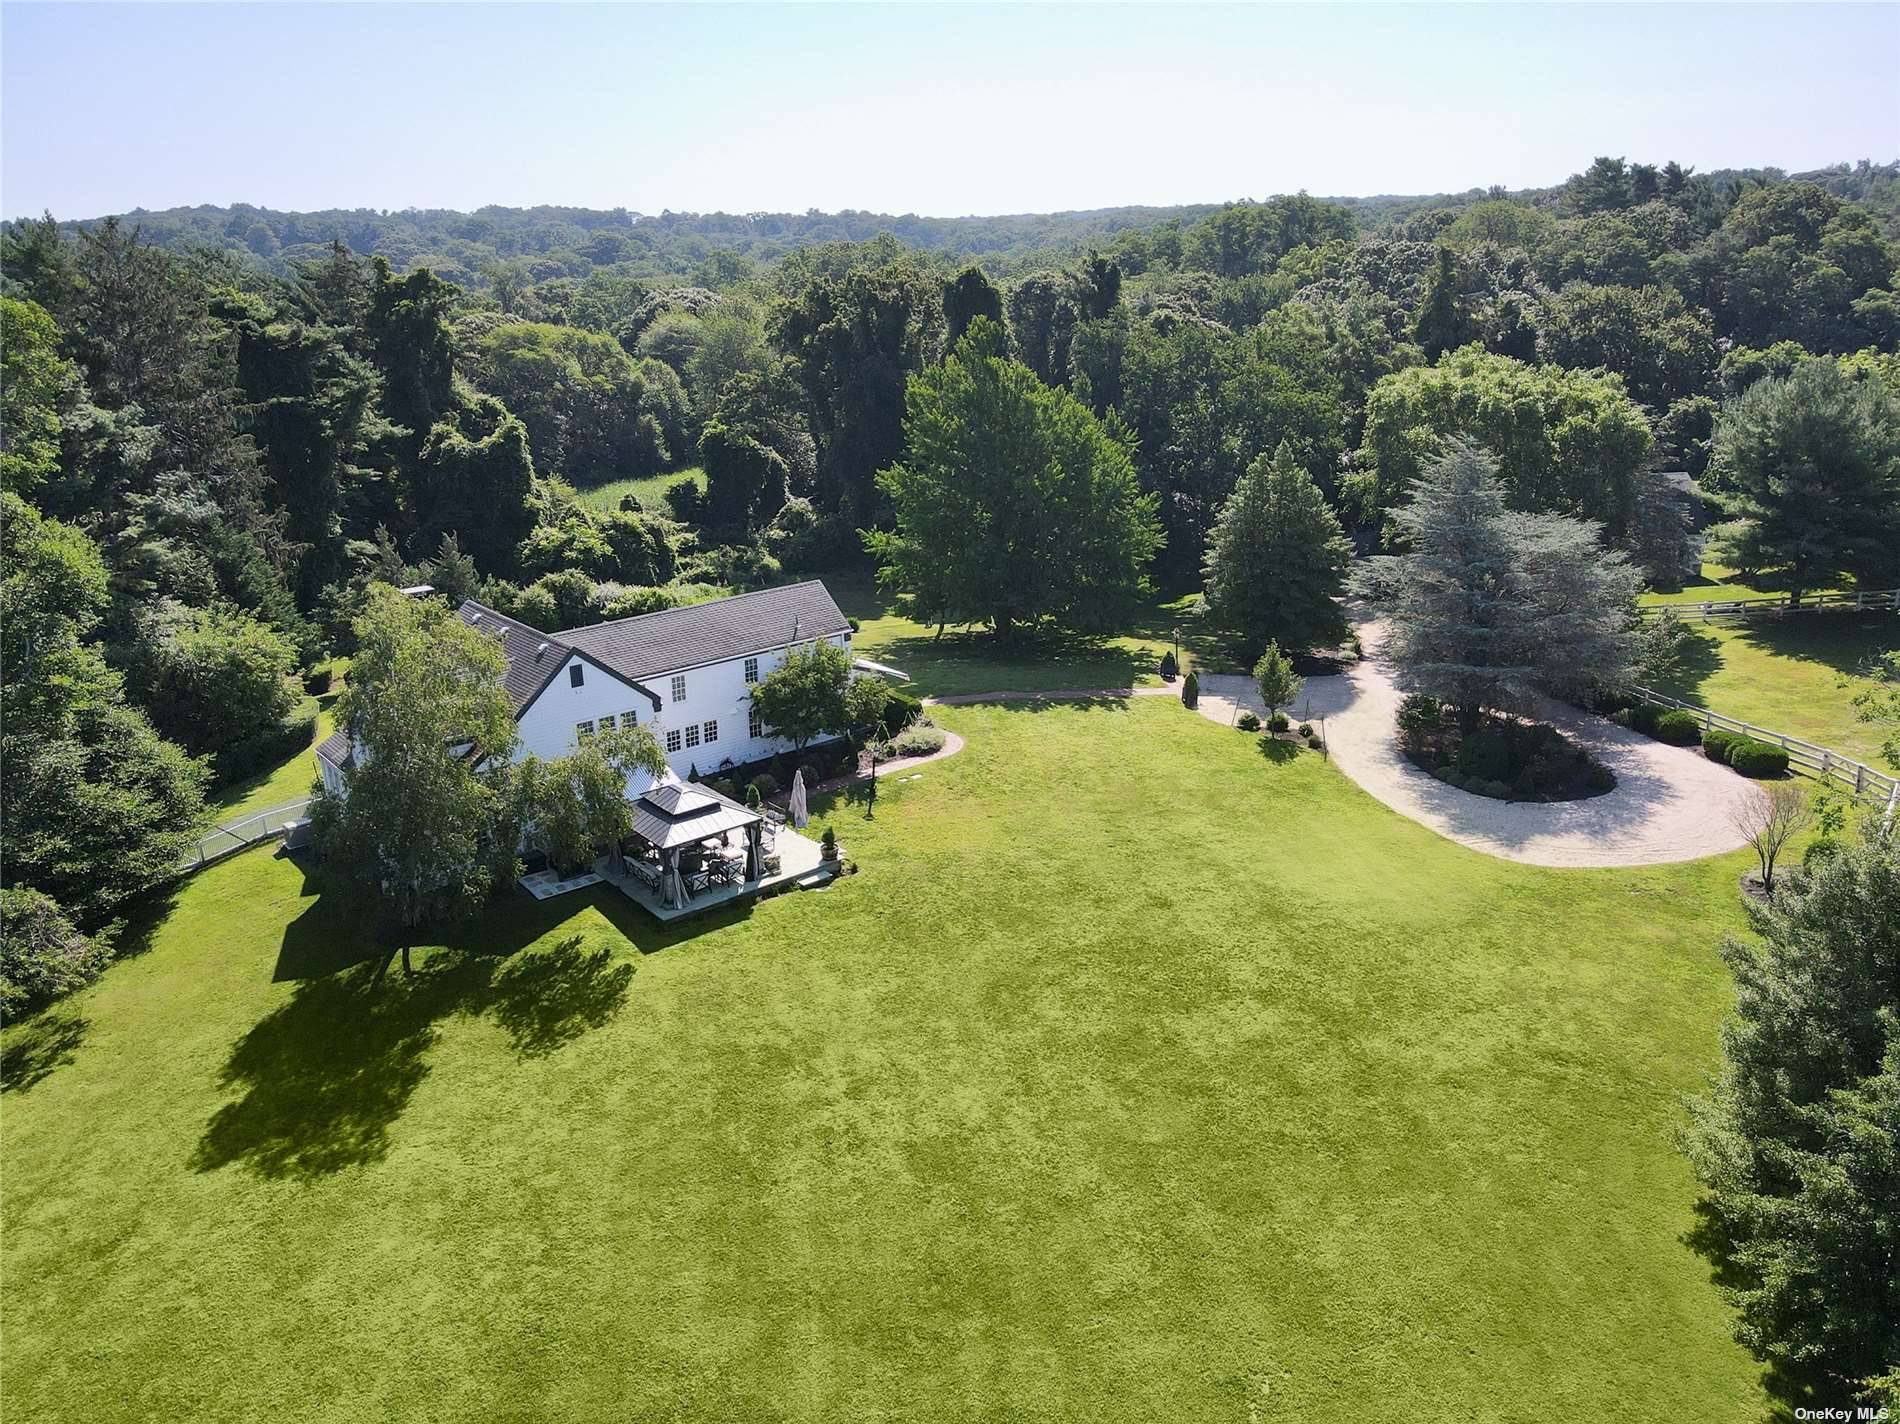 Newly Renovated 1840's Farm House on shy 3 acres, surrounded by 100 acre nature preserve.